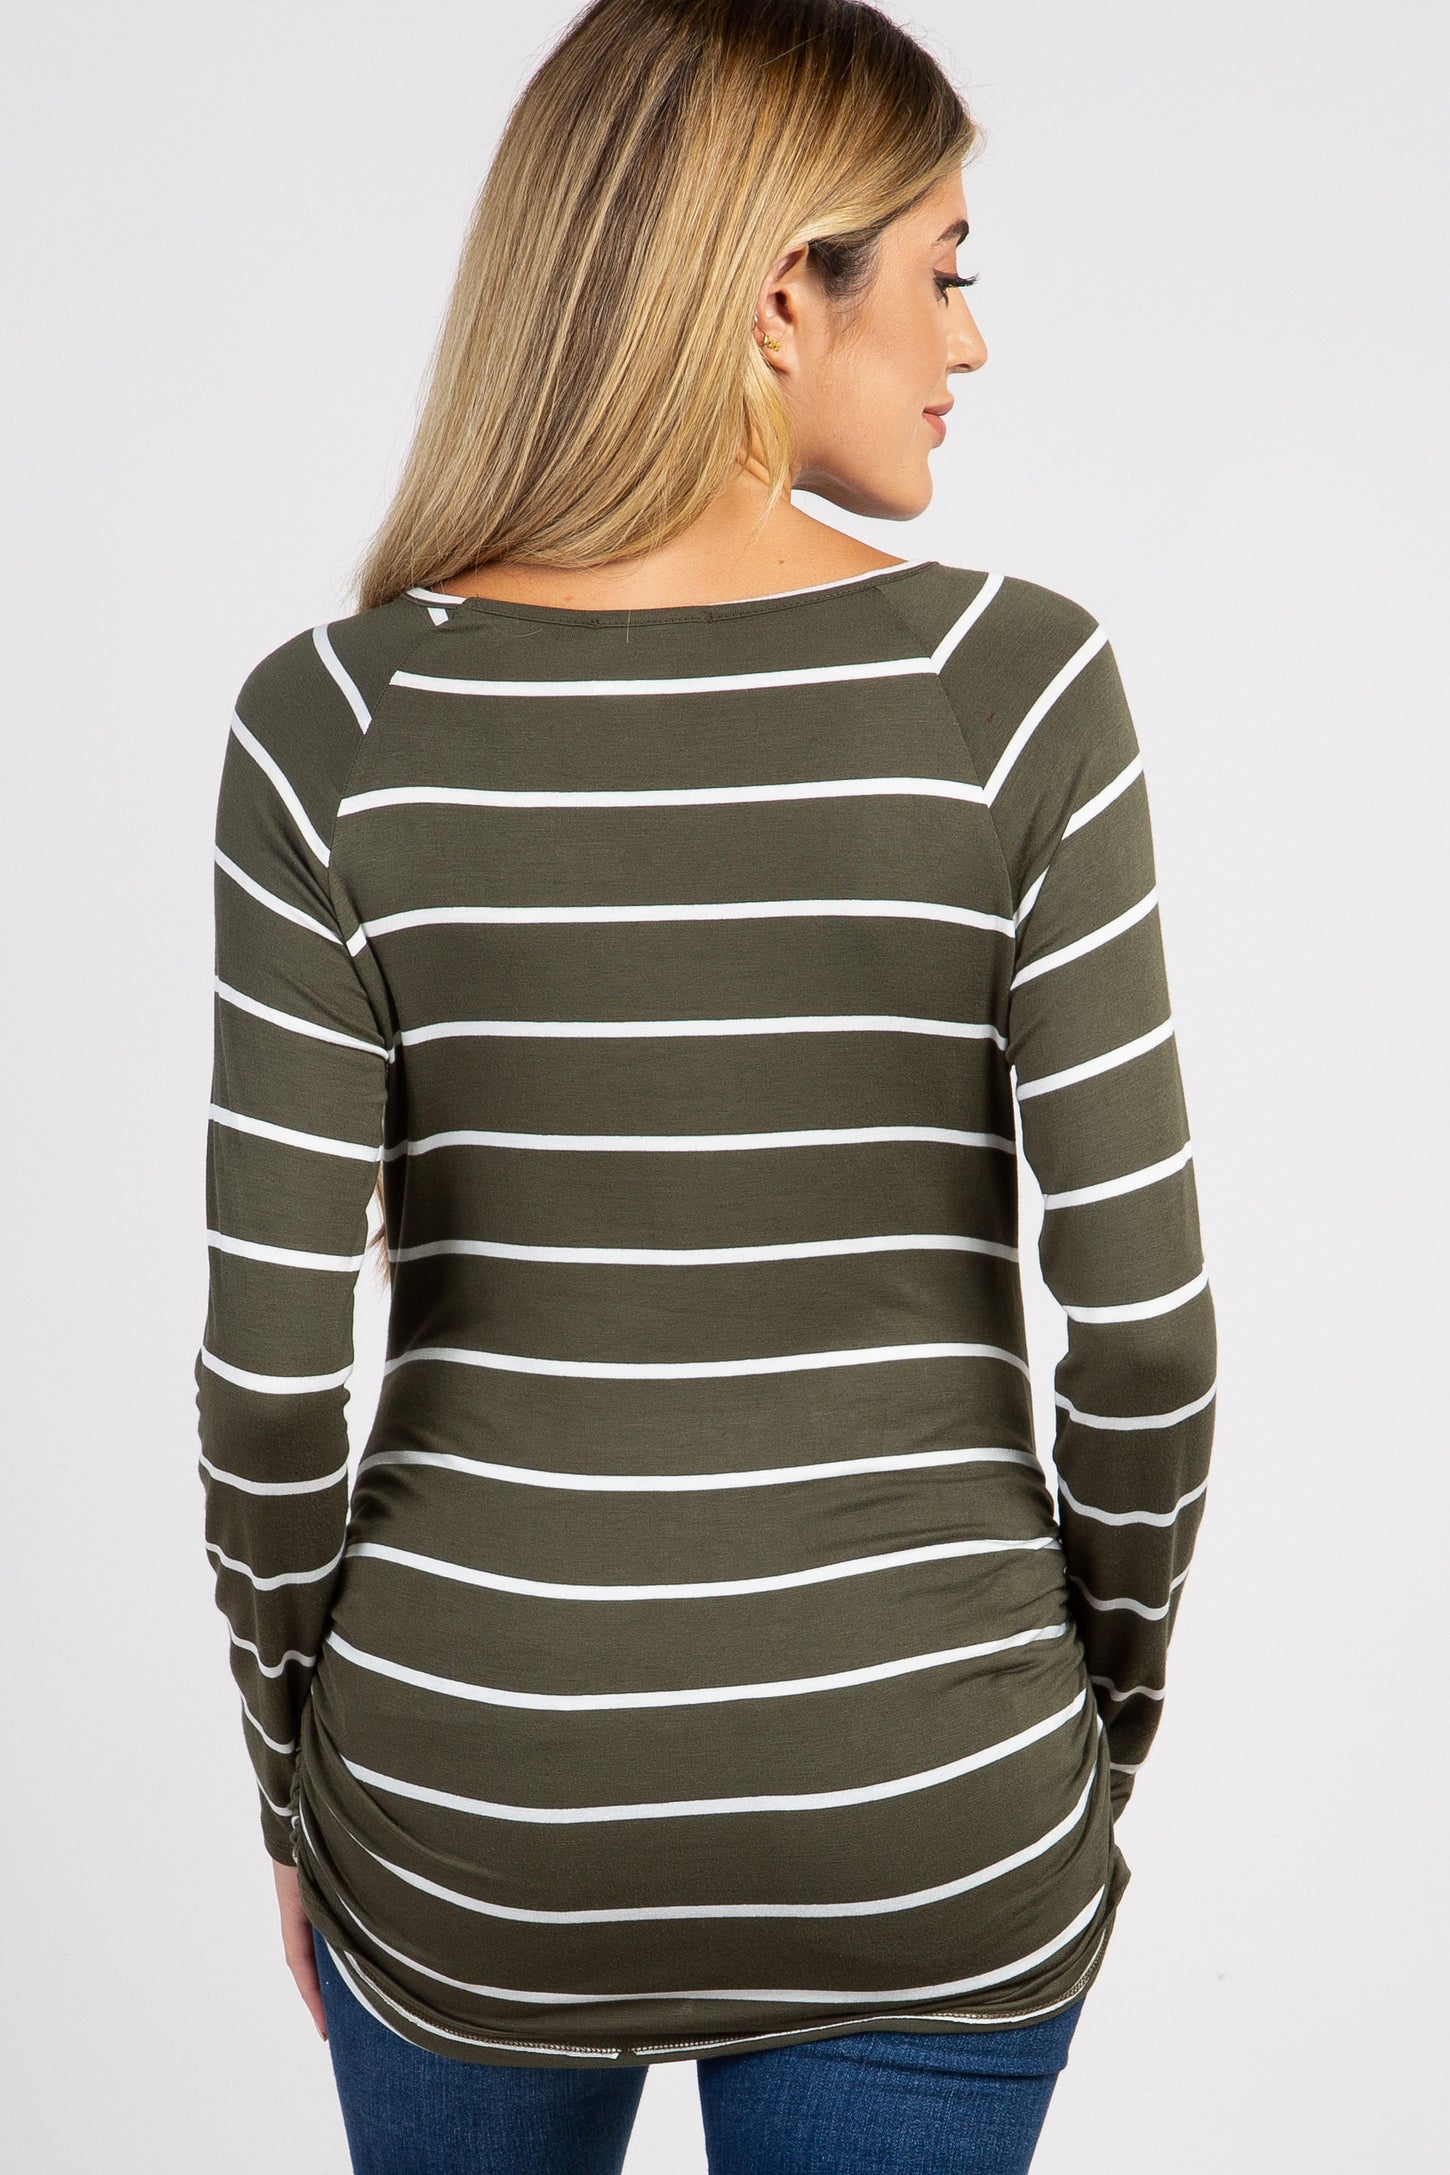 Olive Striped Ruched Maternity Top